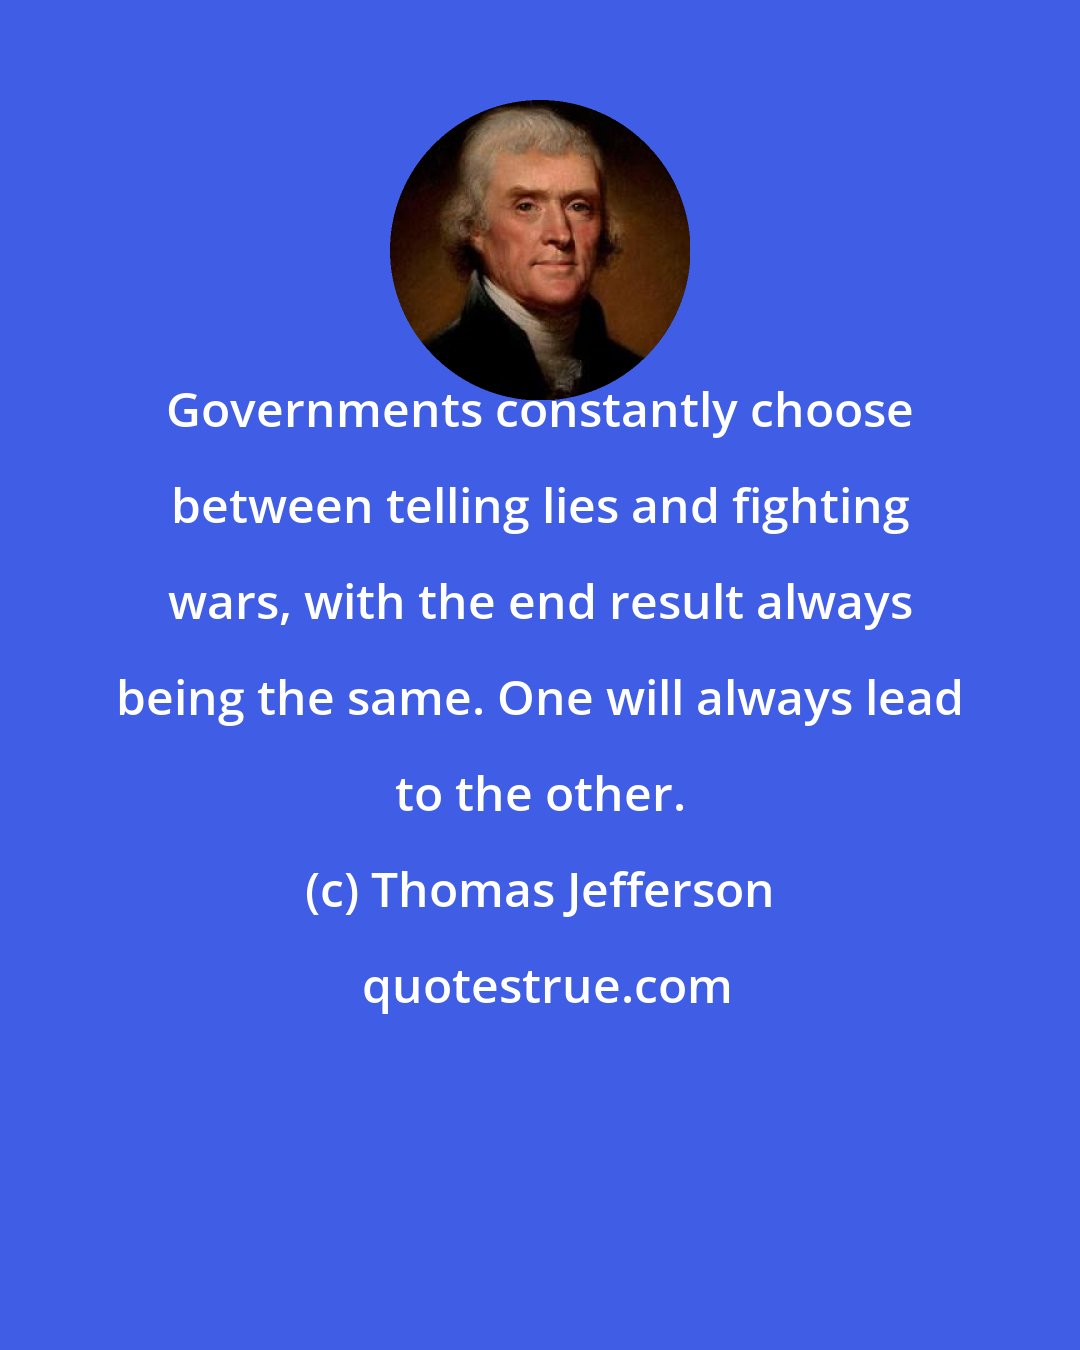 Thomas Jefferson: Governments constantly choose between telling lies and fighting wars, with the end result always being the same. One will always lead to the other.